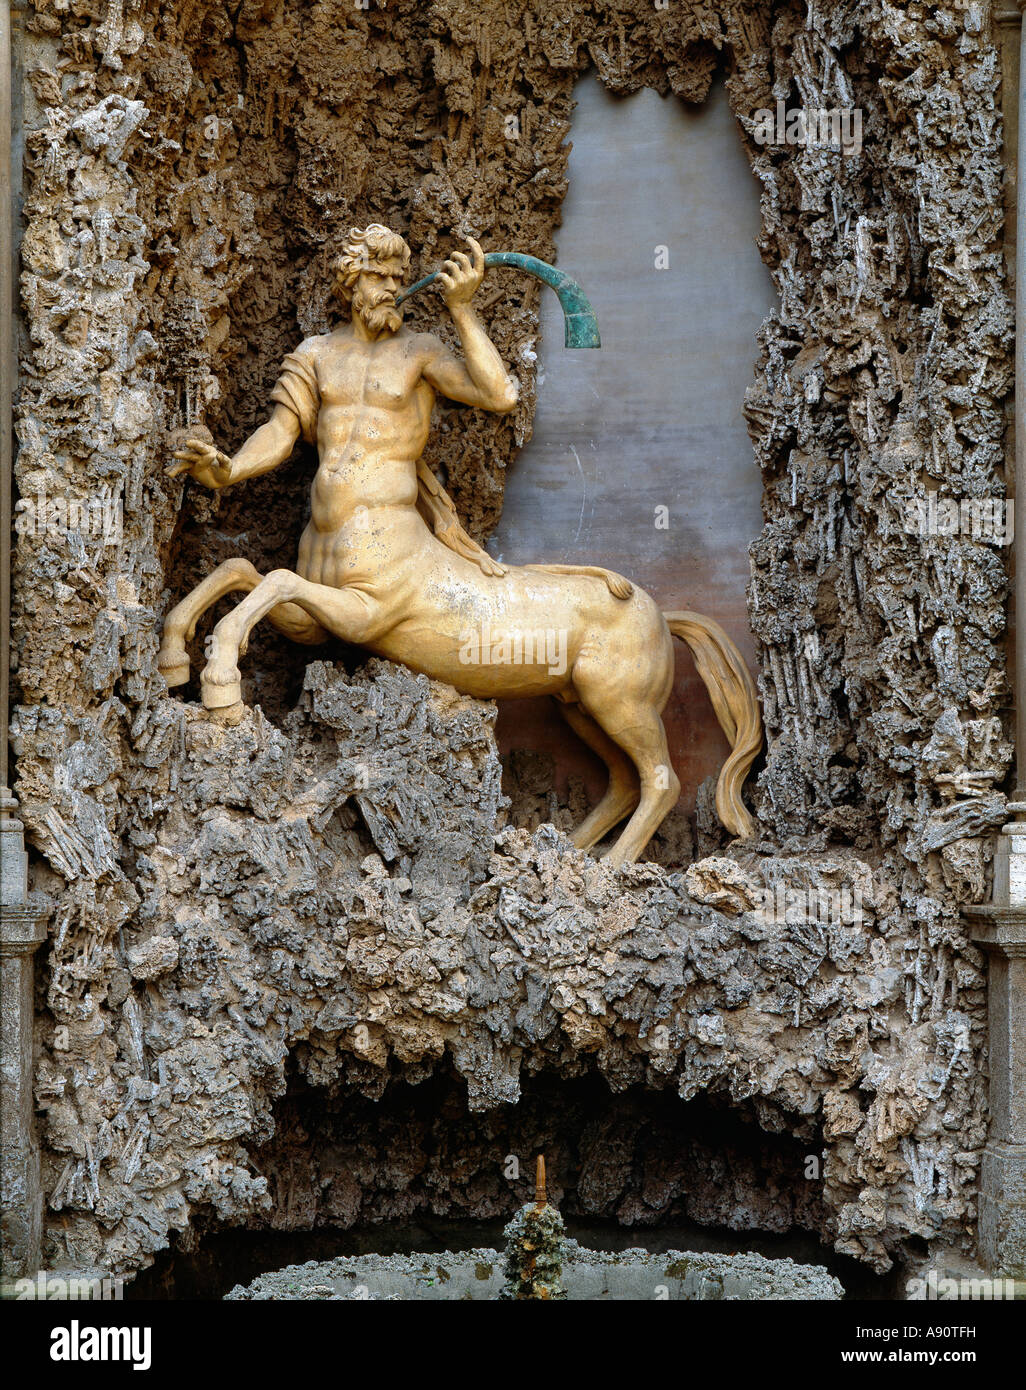 Villa Aldobrandini, Frascati, Italy. A detail of the 17c Baroque water theatre built by Carlo Maderno, showing a statue of a centaur blowing a horn Stock Photo